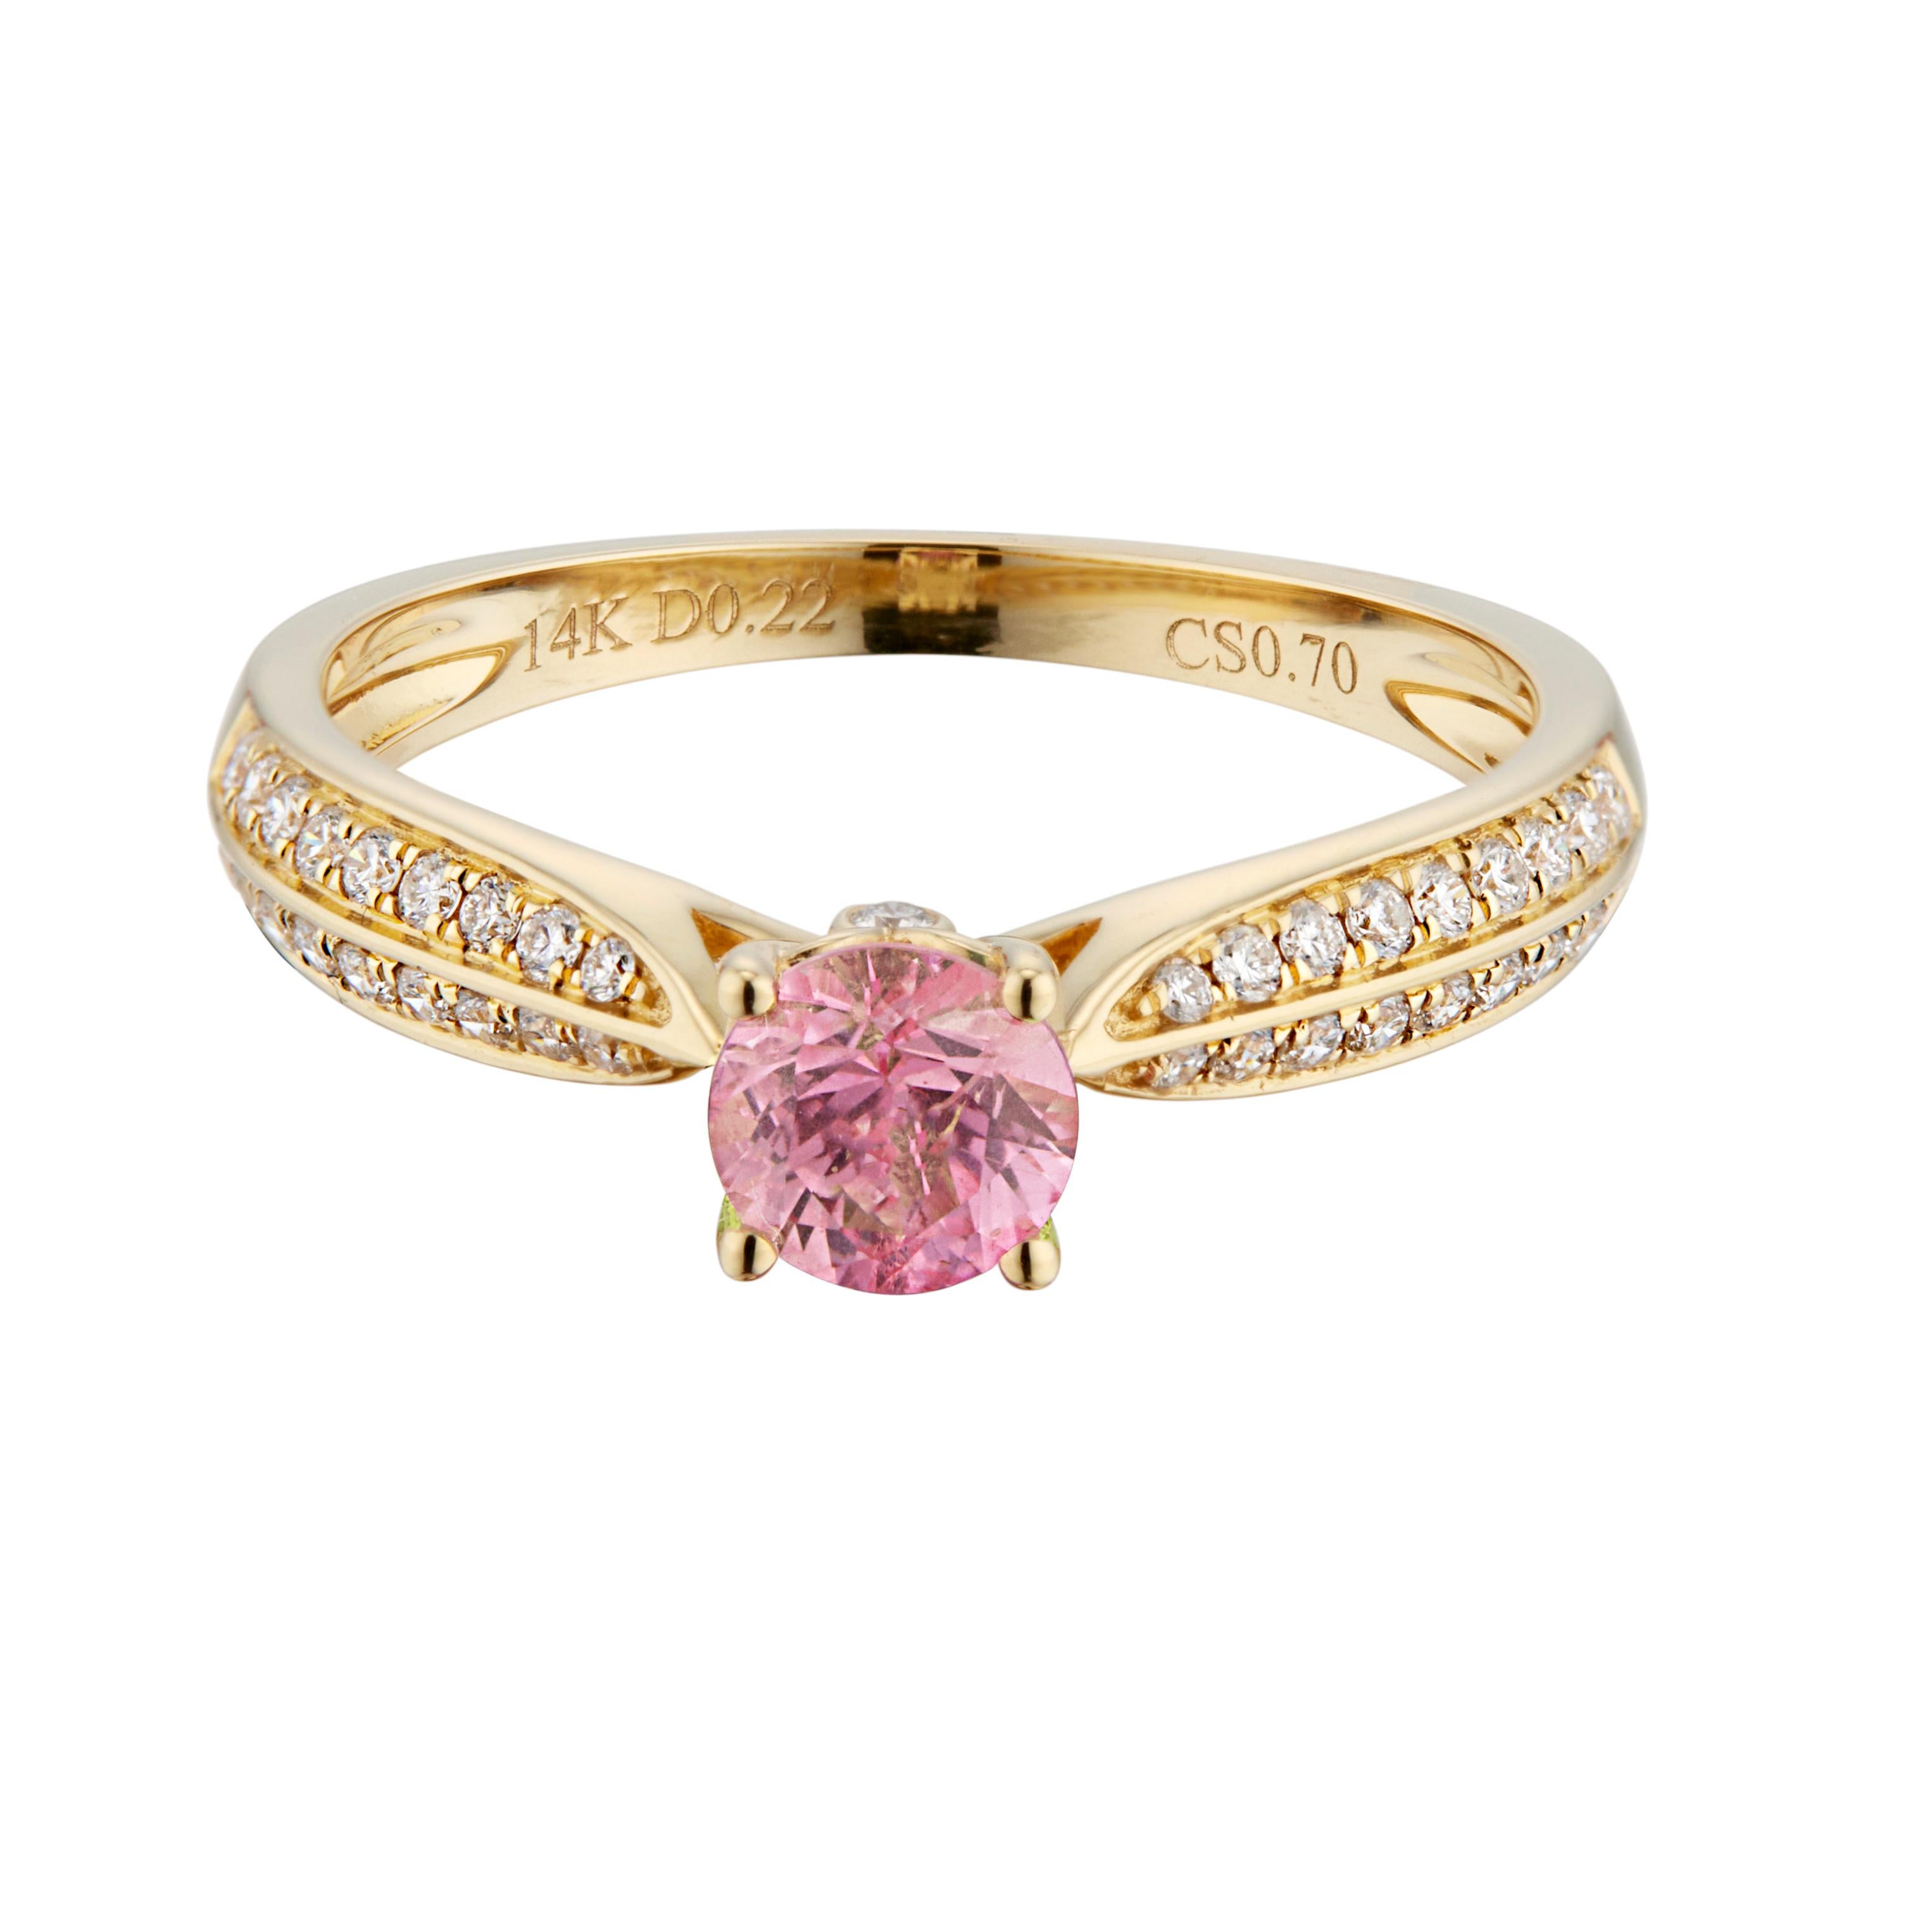 Sapphire and diamond engagement ring. Pink sapphire center stone in a 14k yellow gold solitaire setting, with 38 round brilliant cut diamonds along both sides of the shank. 

1 round pink sapphire, approx. .70cts
38 round brilliant cut diamonds, G